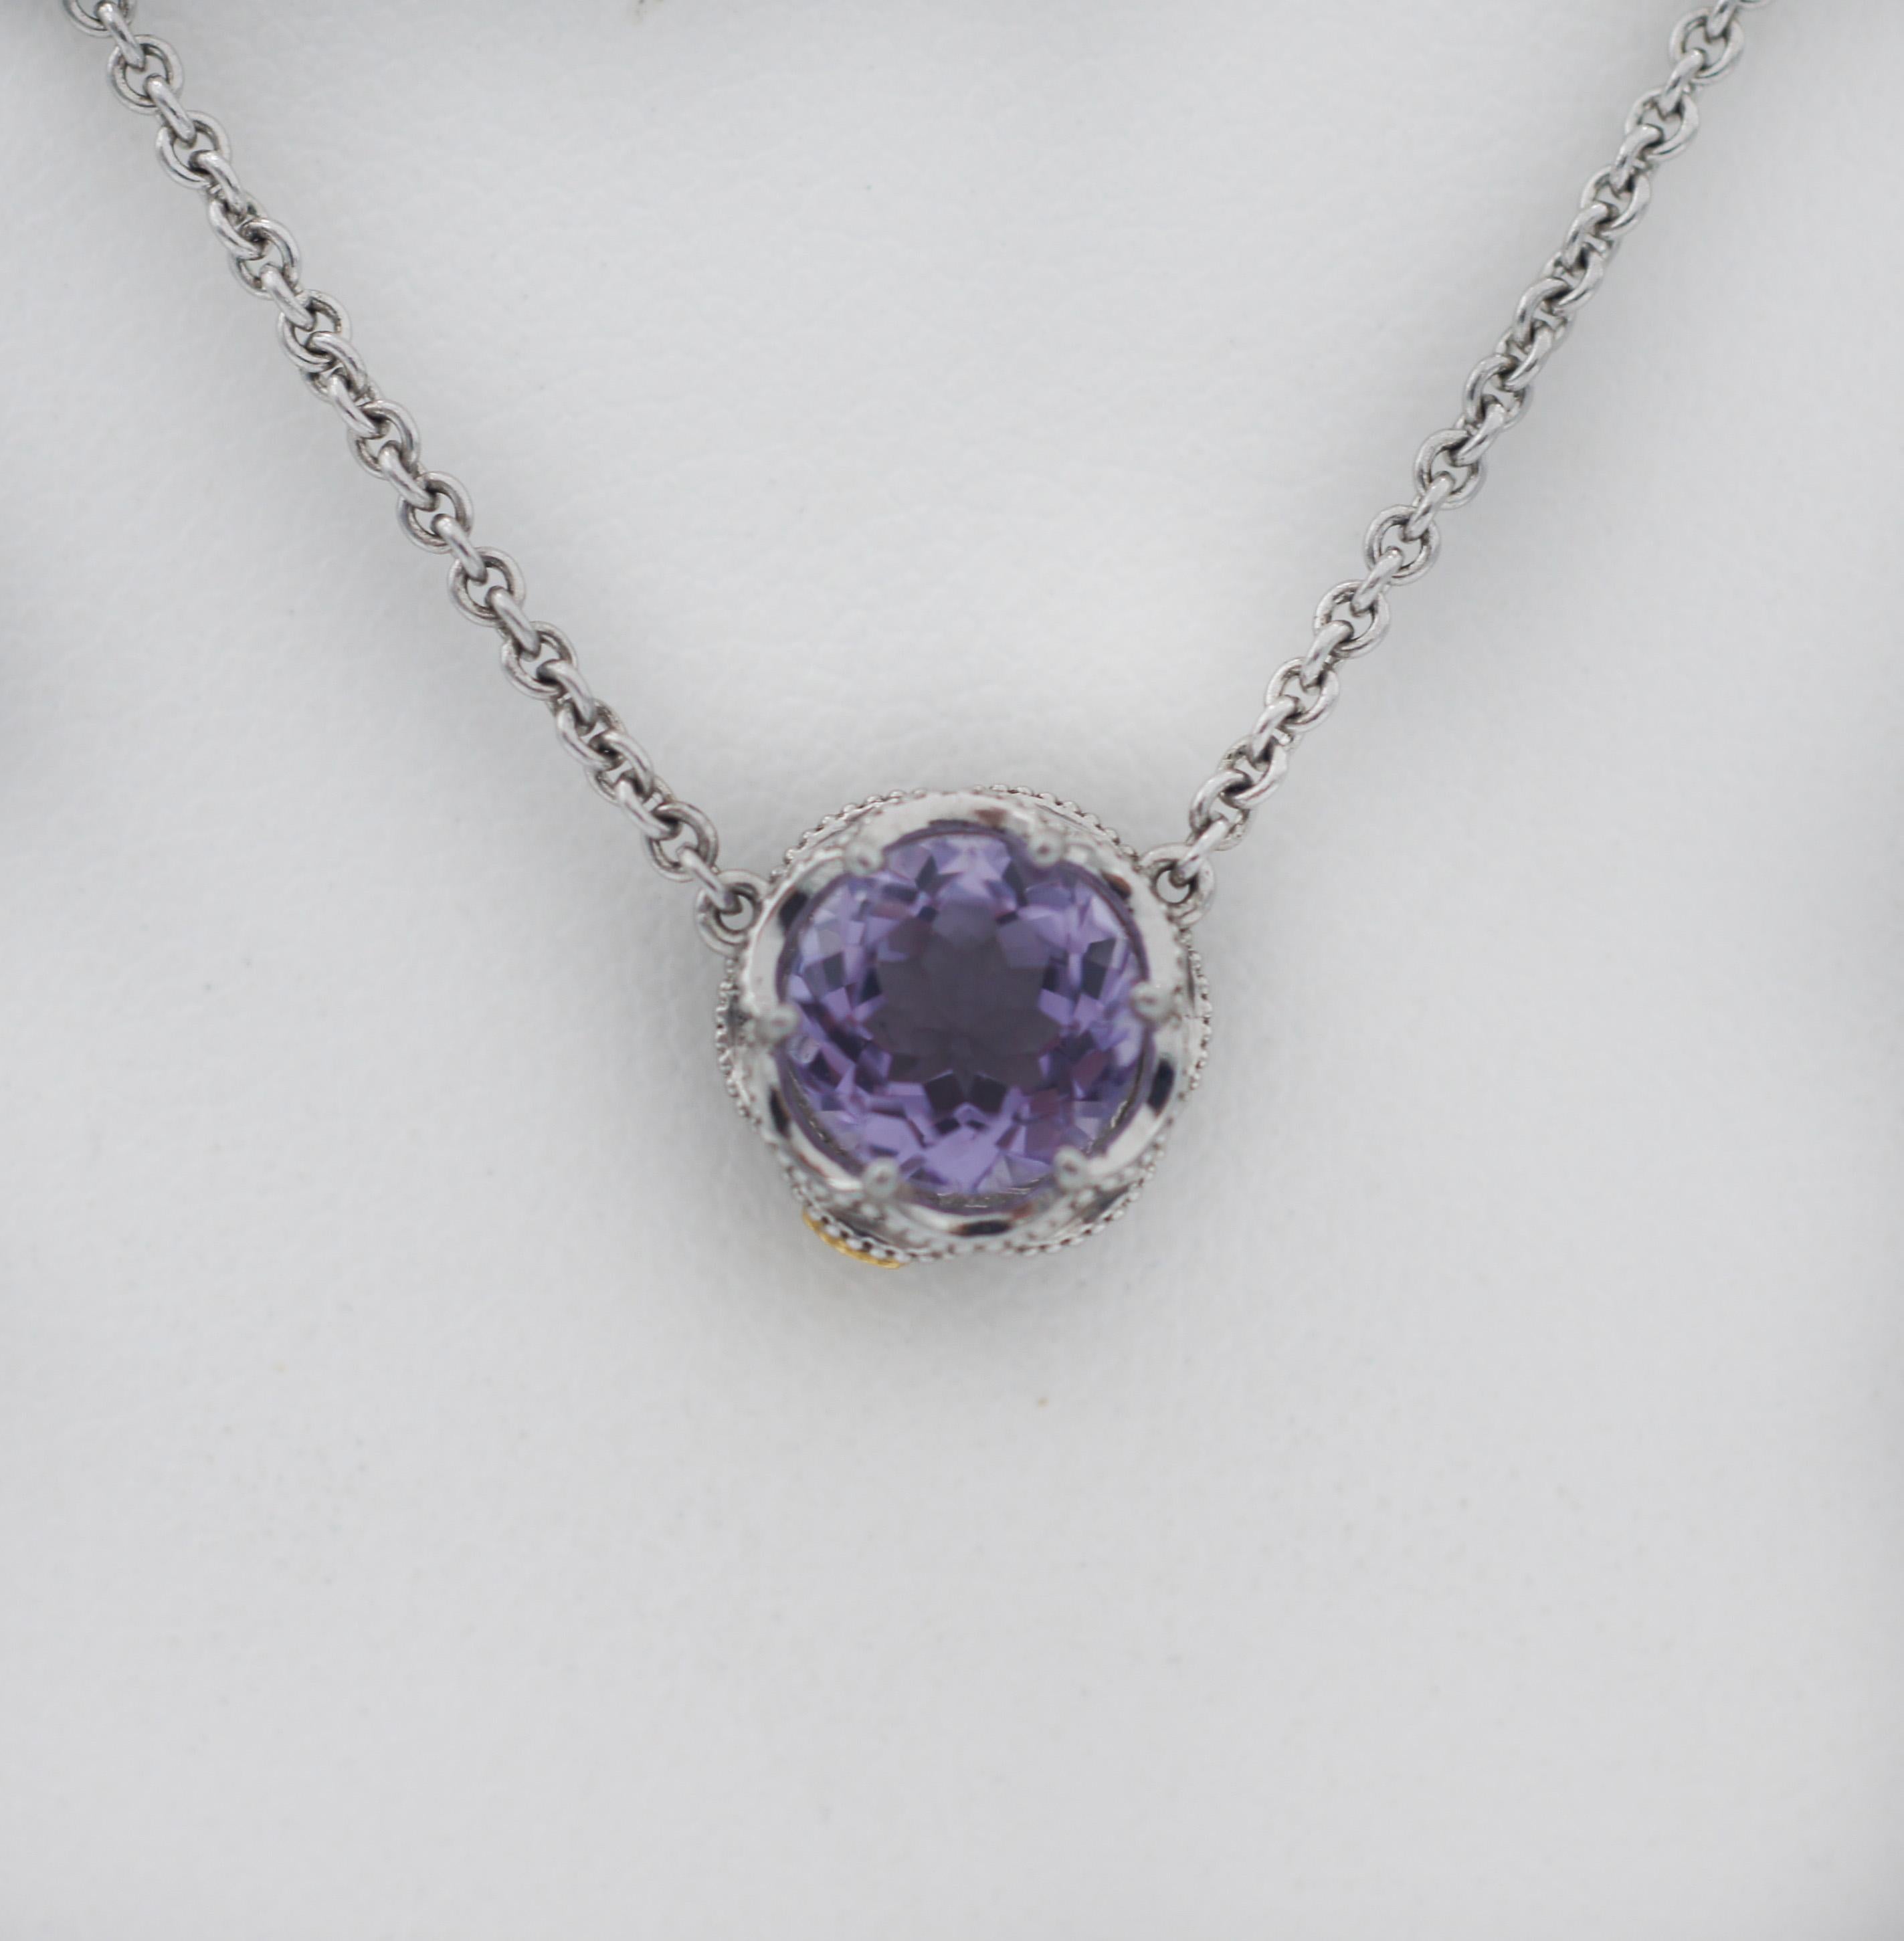 TACORI
Silver 925
Crescent Crown
Bold Crescent Station Necklace featuring Amethyst
Tacori STYLE SN22401
This multifaceted crystal clear Rose Amethyst gemstone pendant will sparkle with every beat of your heart. The Rose Amethyst gemstone is encased